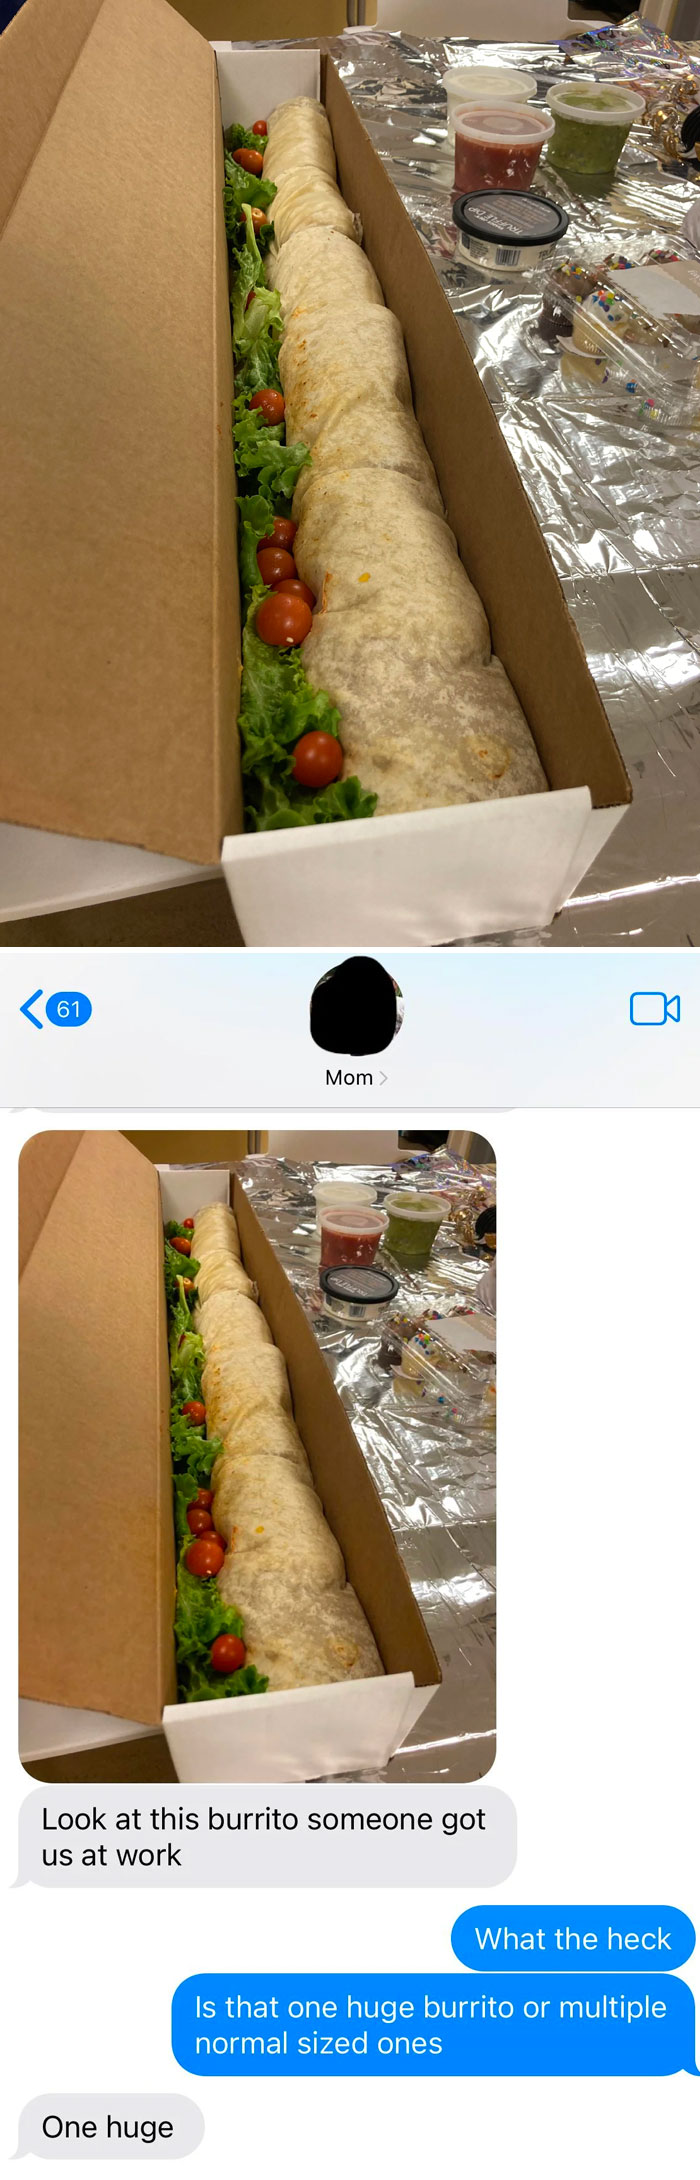 This Burrito Given To My Mom's Work